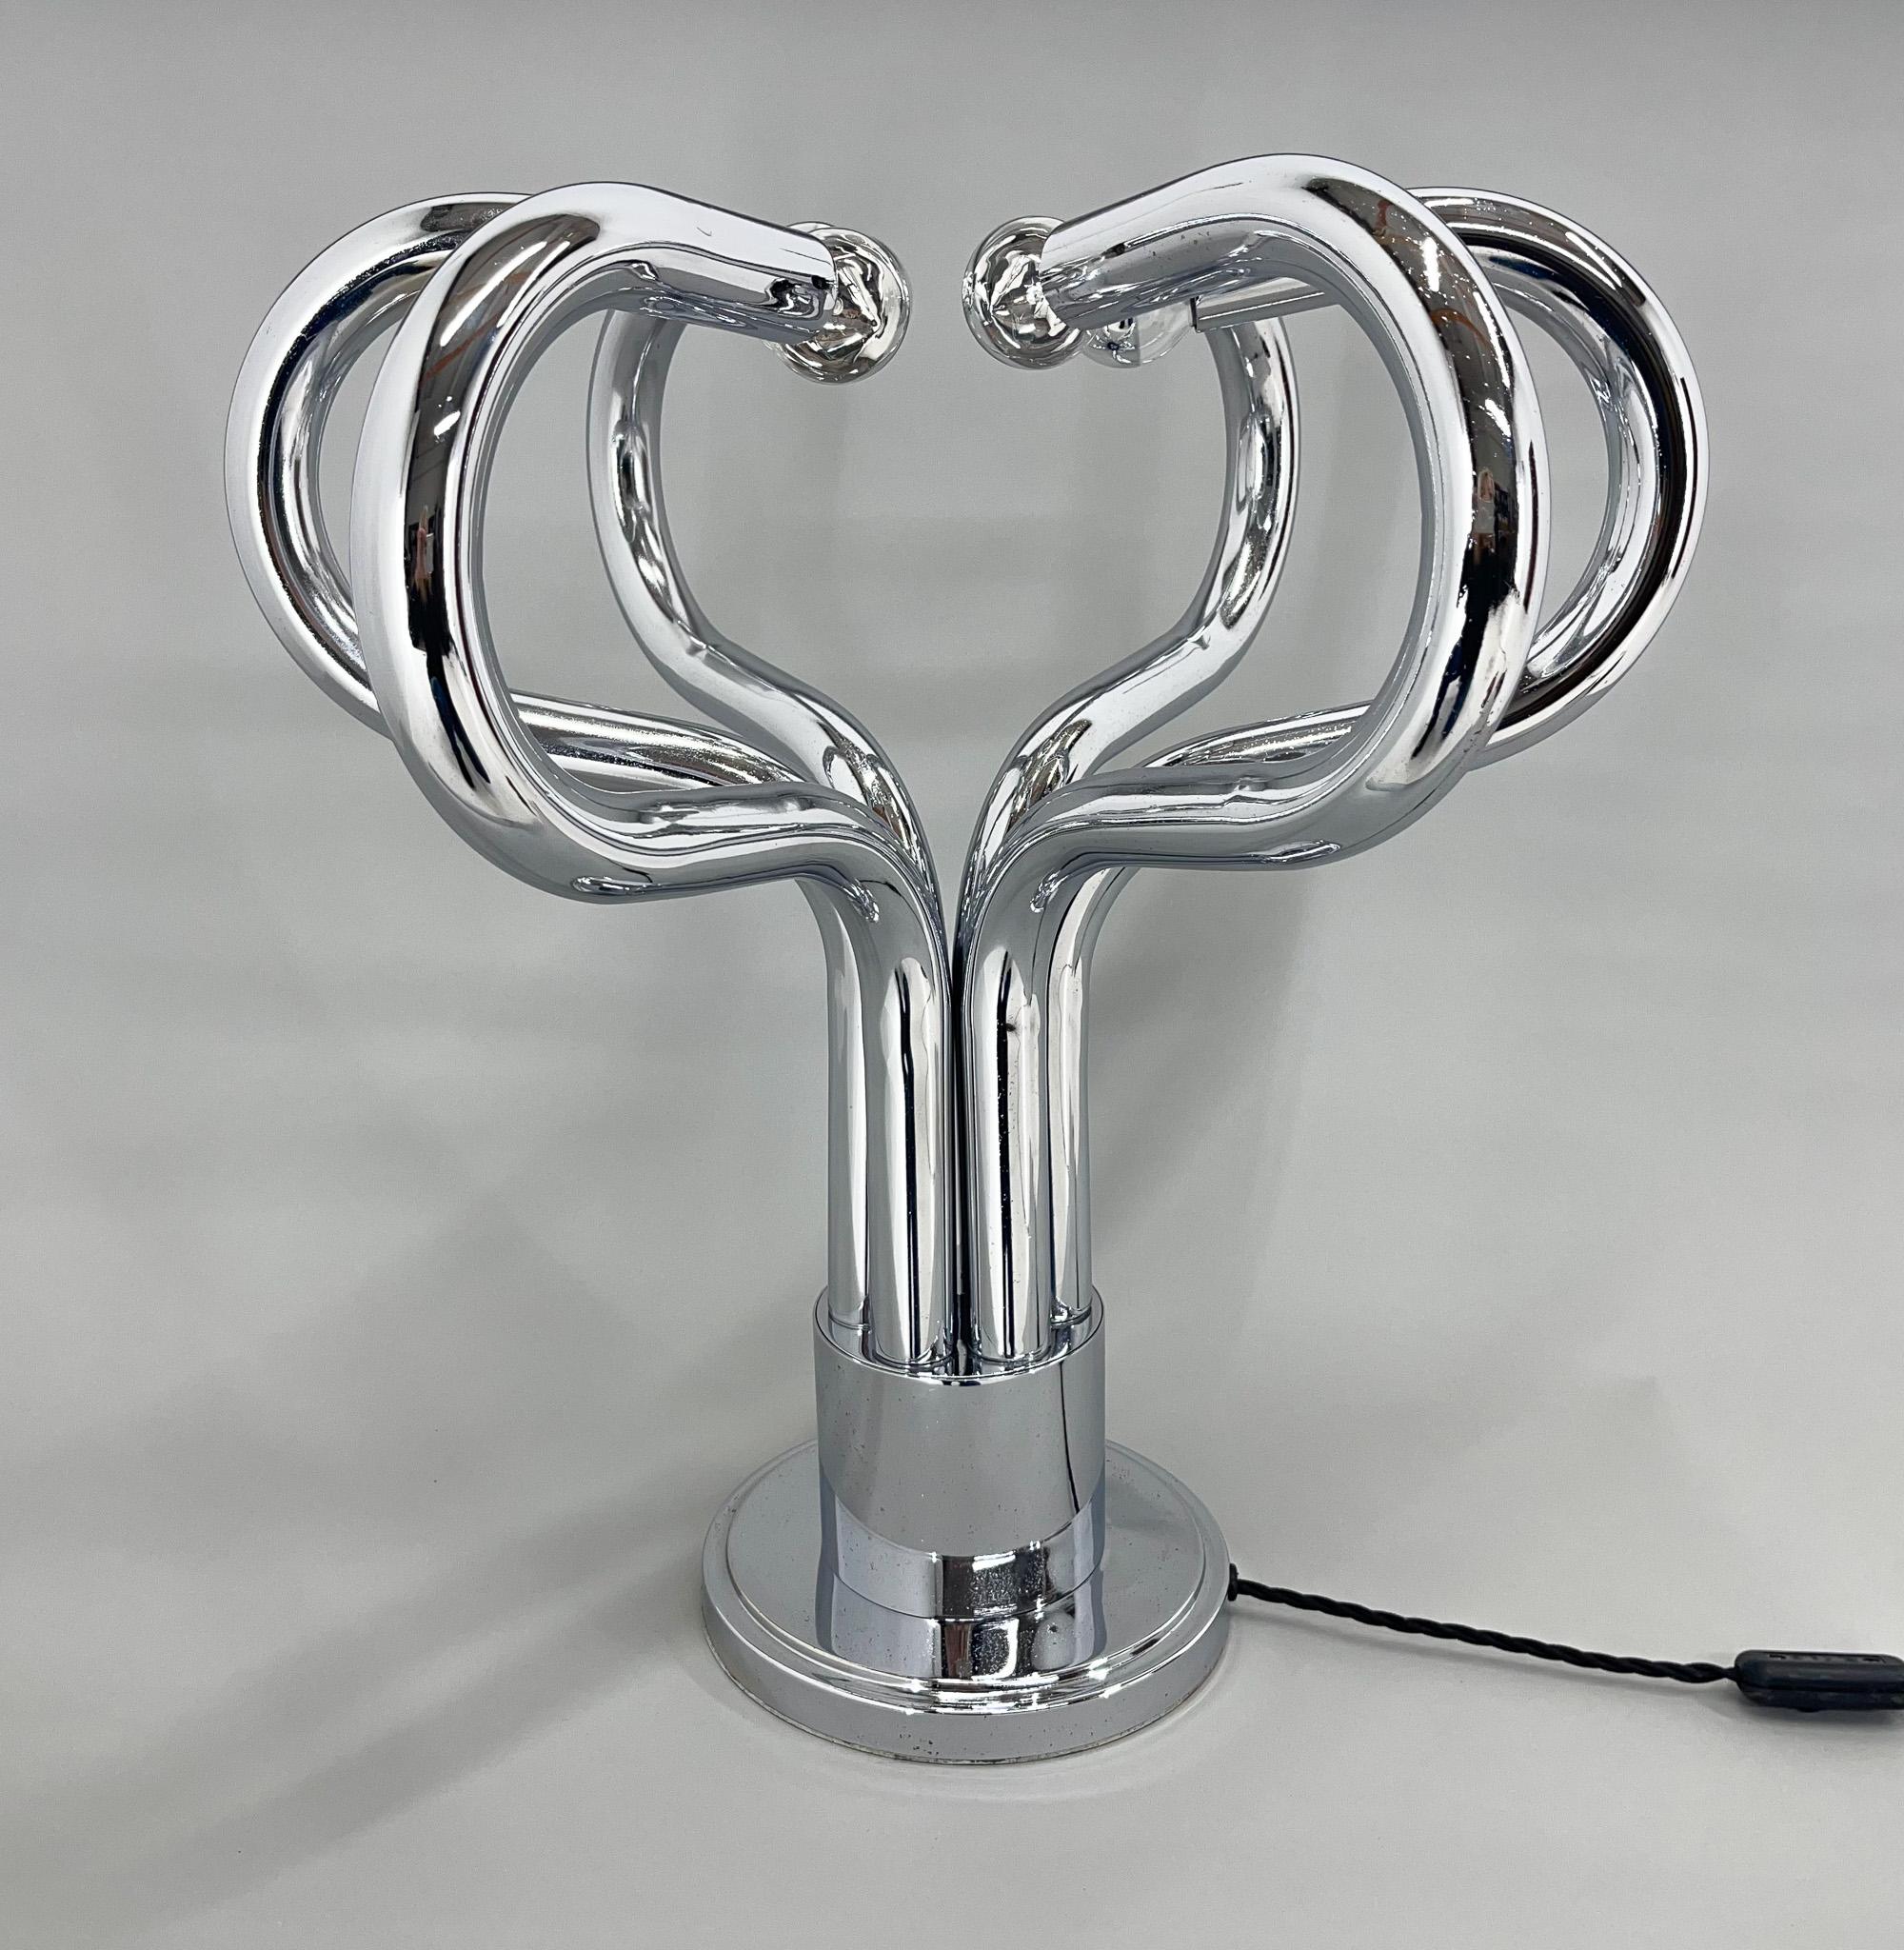 Unique chrome vintage table lamp by Stilux Milano. Made in Italy in the 1970's. The lamp is all chrome, professionally restored, newly rewired. The chrome still shows signs of time wear, but this only adds to the lamp's unique character. Bulbs: 6 x